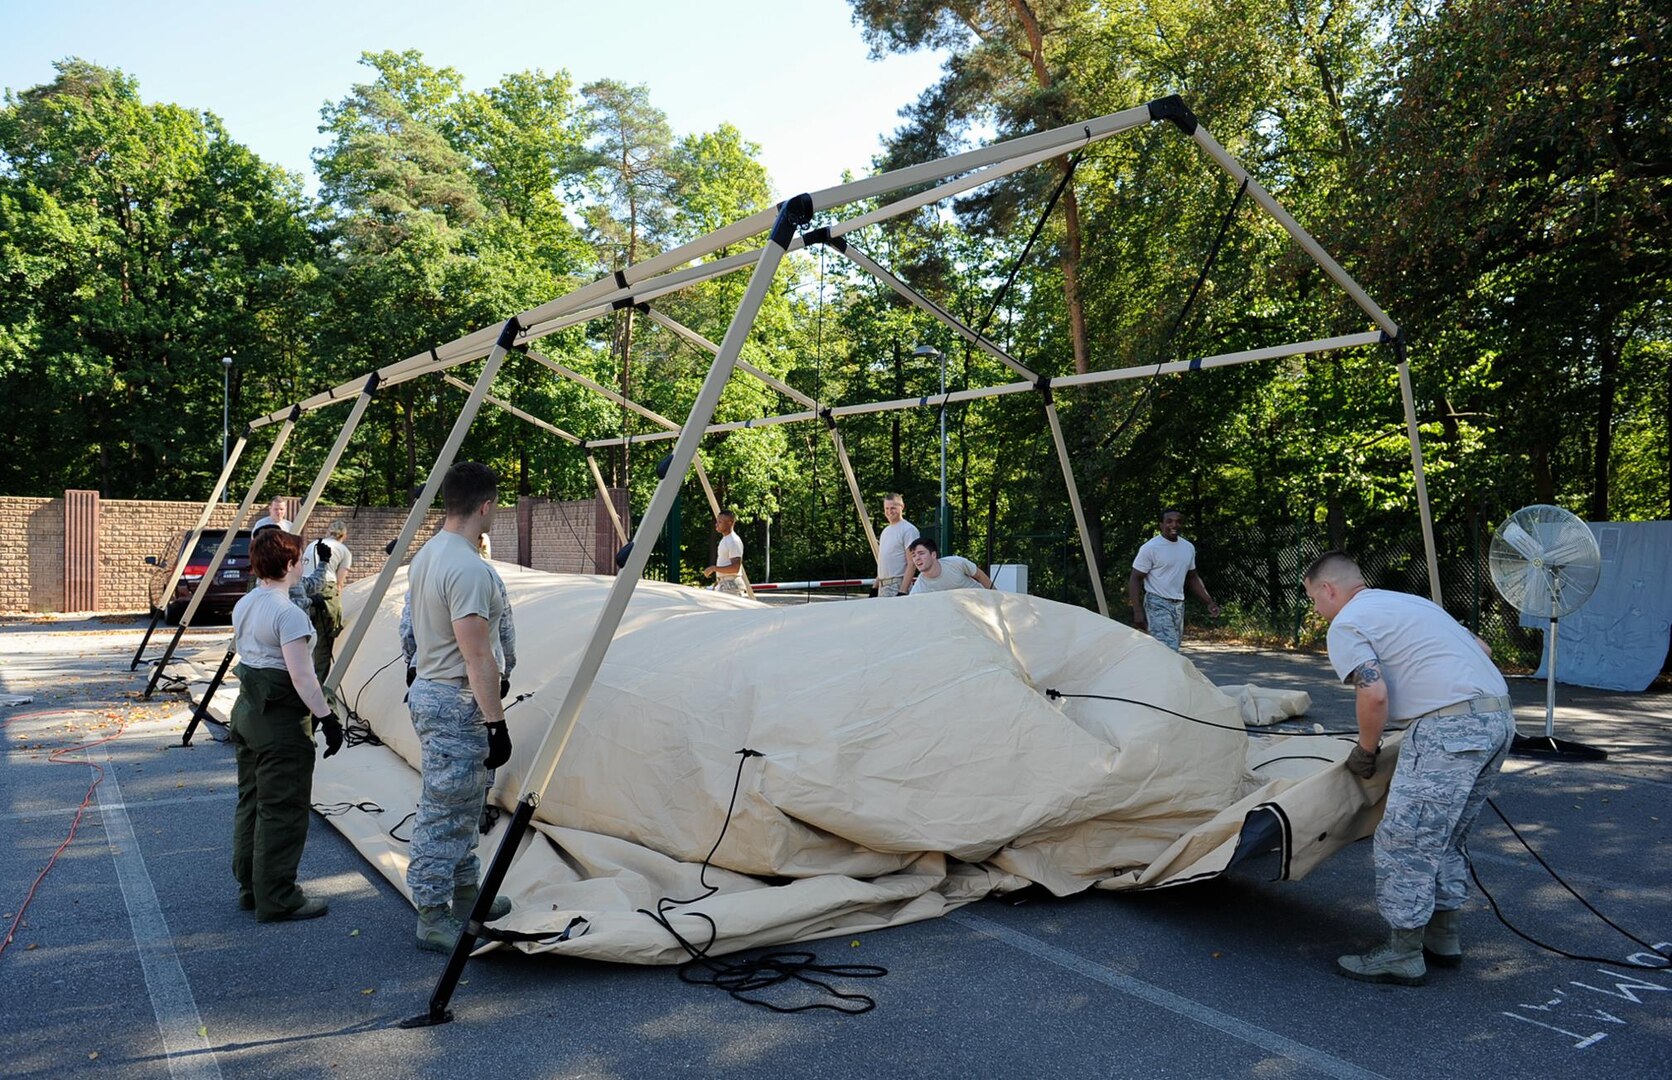 Airmen from the 86th Medical Support Squadron’s medical logistics flight take down a tent at Ramstein Air Base, Germany, Sept. 29, 2016. War reserve material technicians cleaned out tents that were used during Exercise Immediate Response 2016 in Slovenia, which took place from Sept. 9 to 23. (U.S. Air Force photo by Airman 1st Class Savannah L. Waters)
